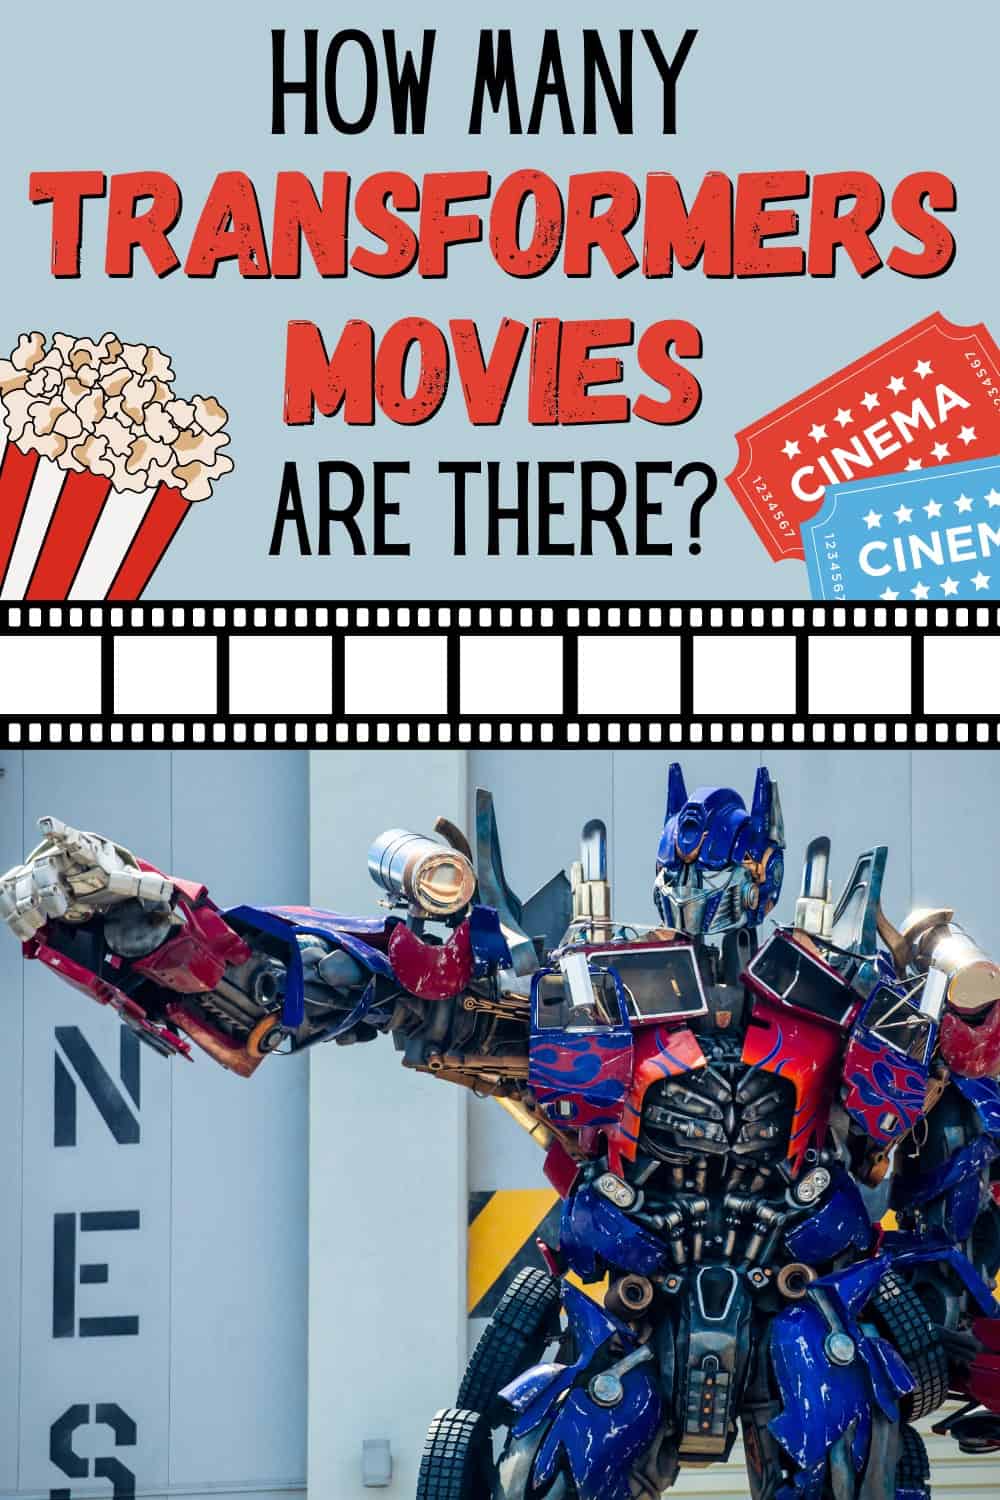 There are 10 Transformers movies in total